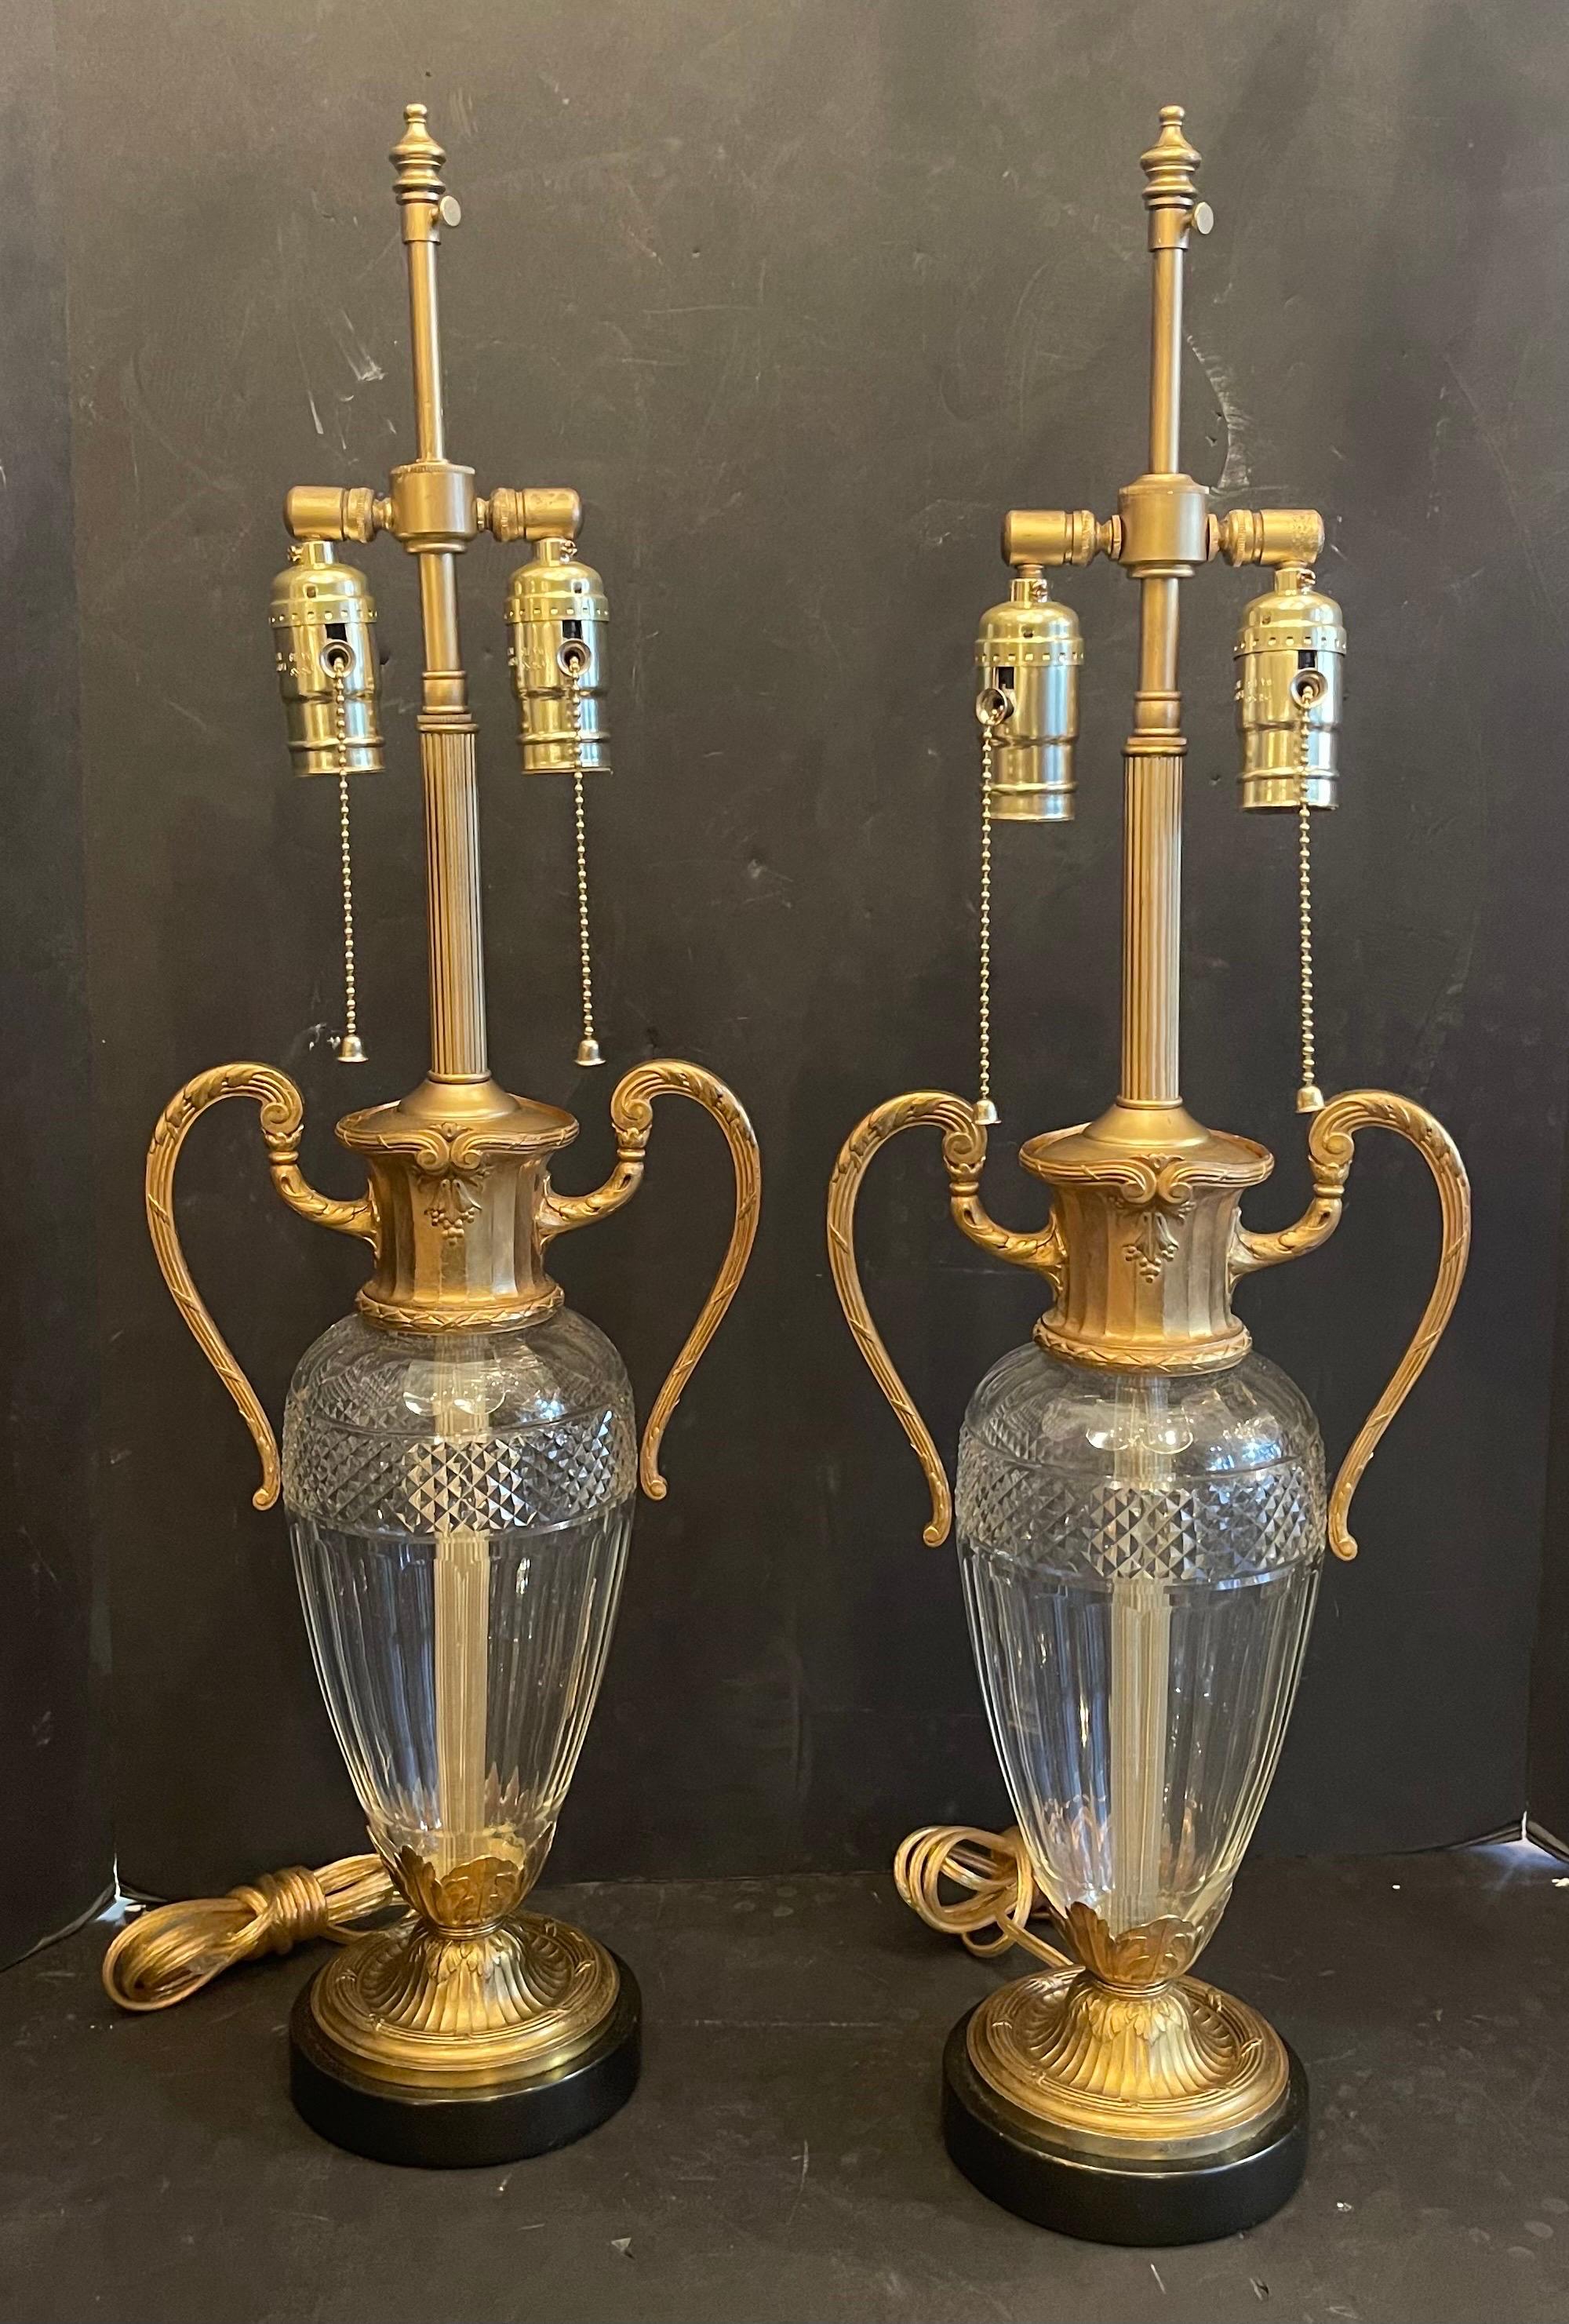 A Wonderful Pair Of French Gold Gilt Dore Bronze Ormolu & Cut Crystal Urn Form Lamps, Completely Rewired With New Sockets In The Manner Of Baccarat.